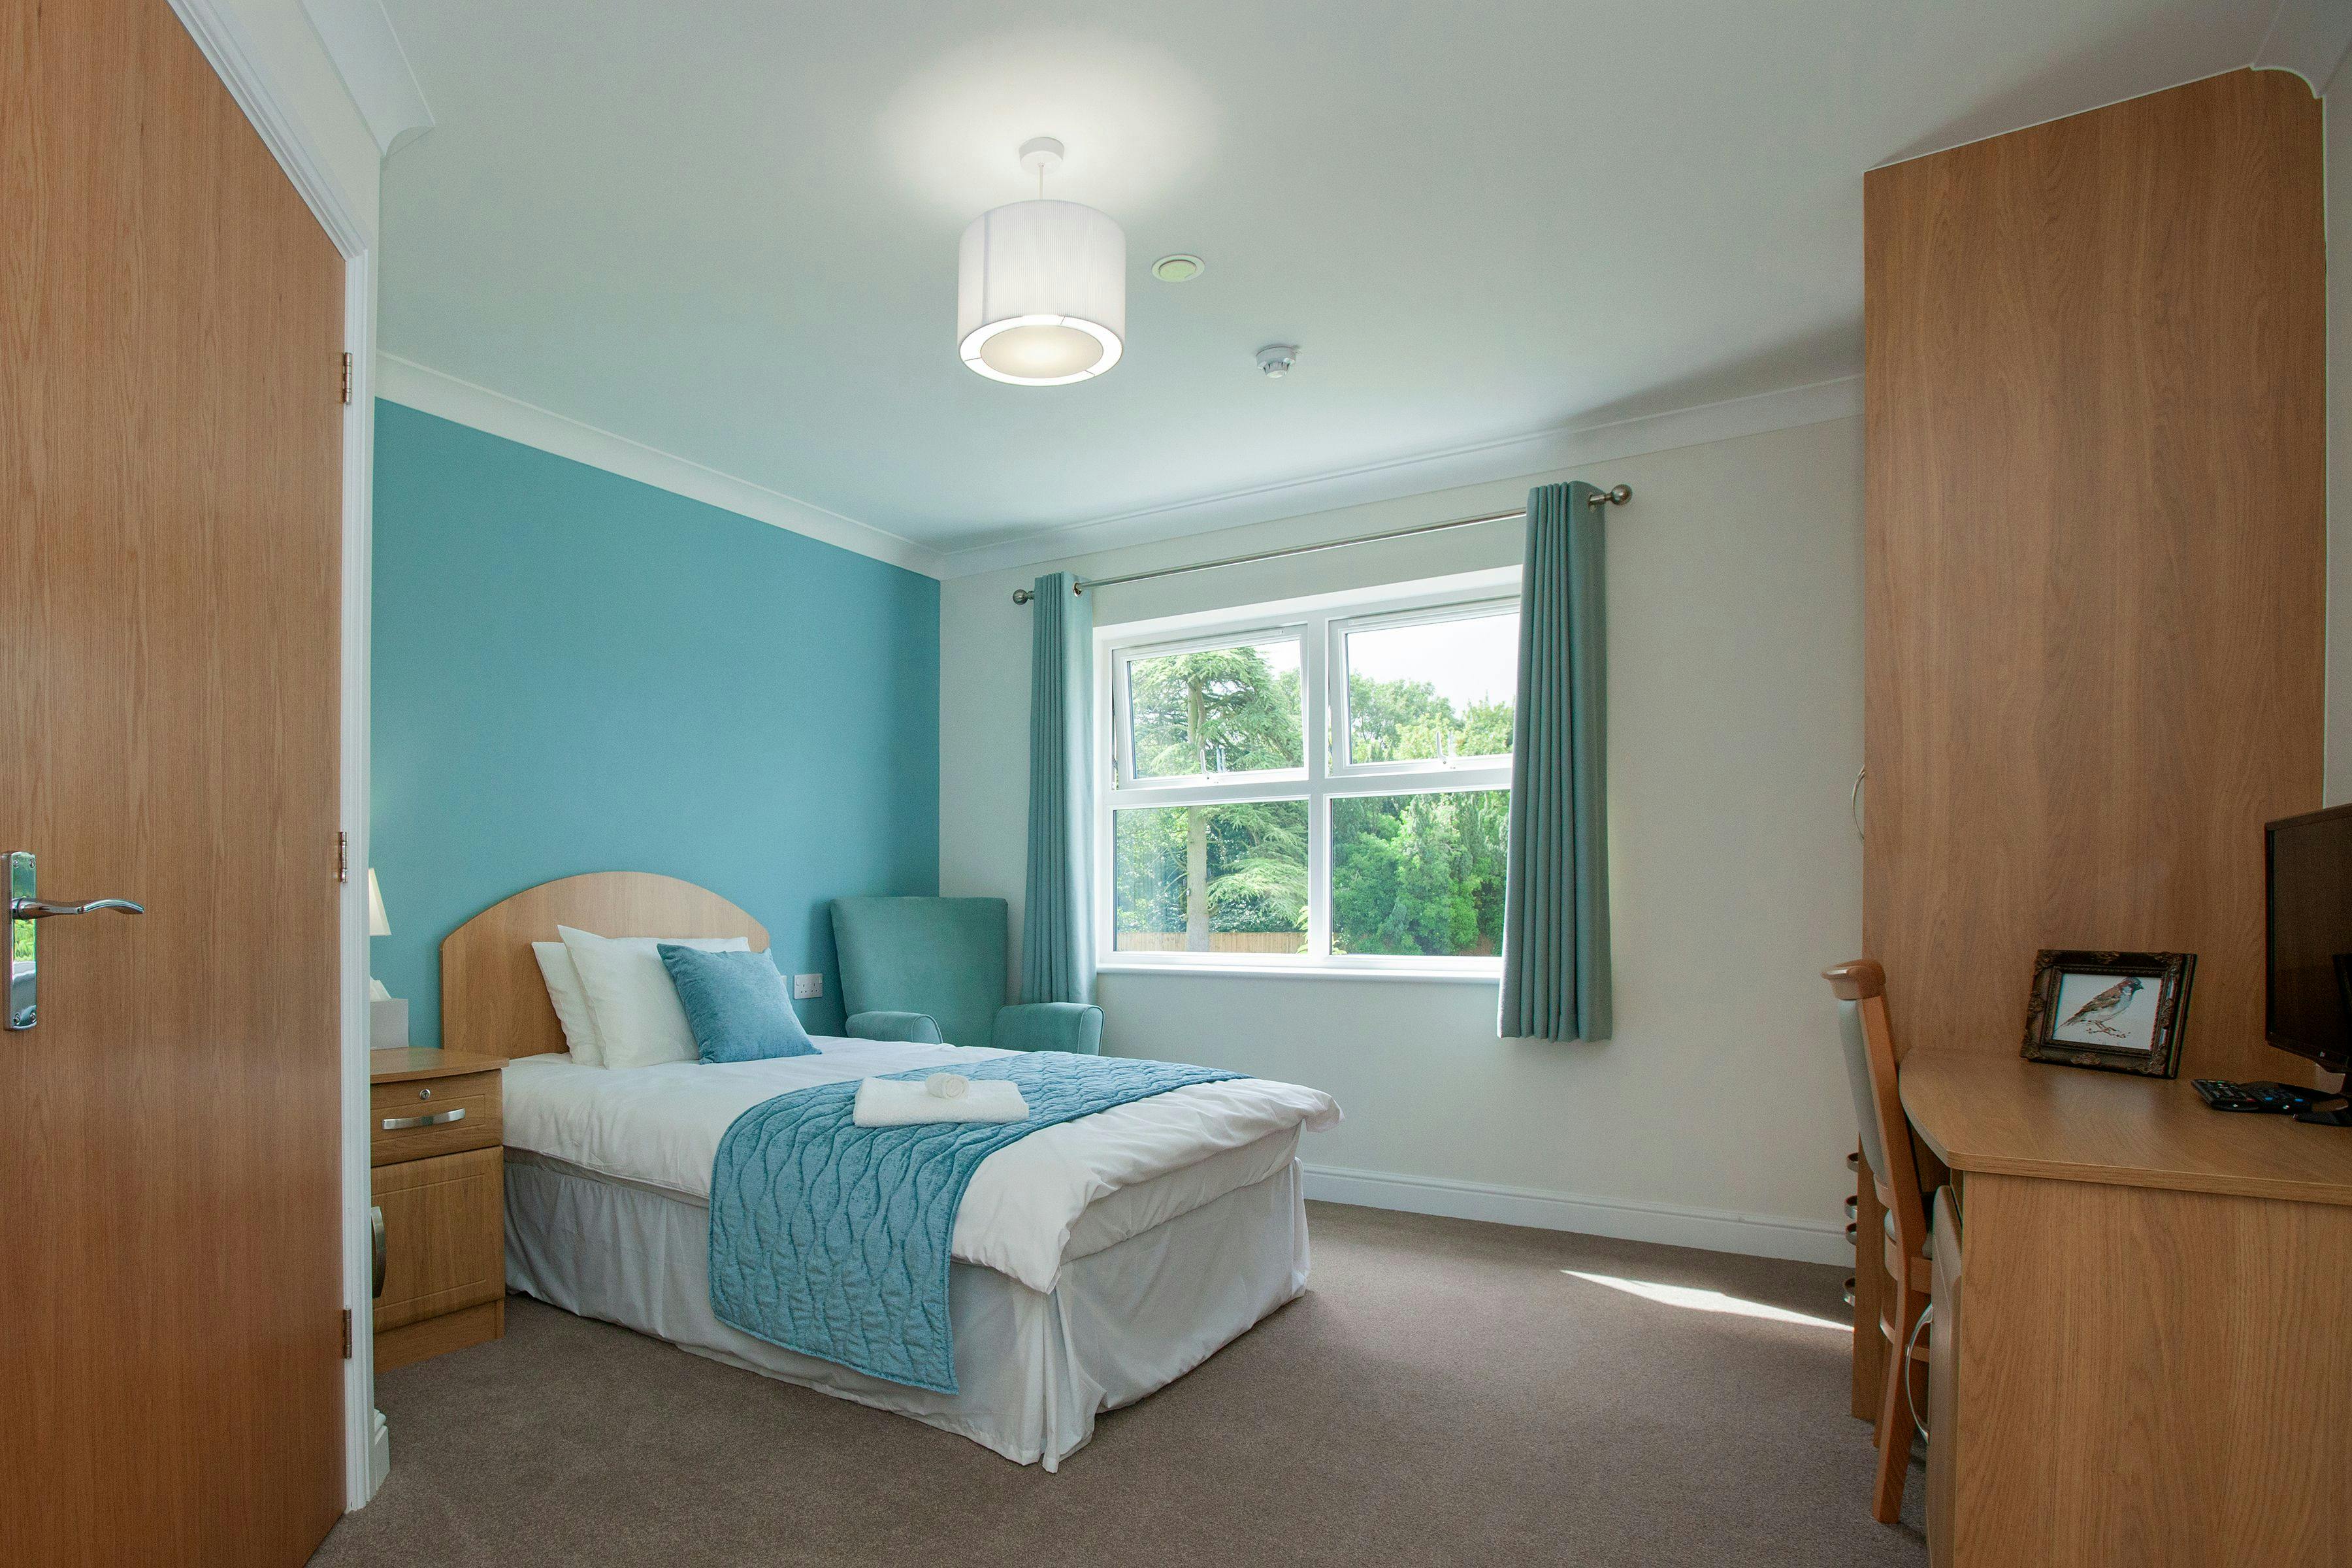 Bedroom at Briggs Lodge Care Home in Devizes, Wiltshire